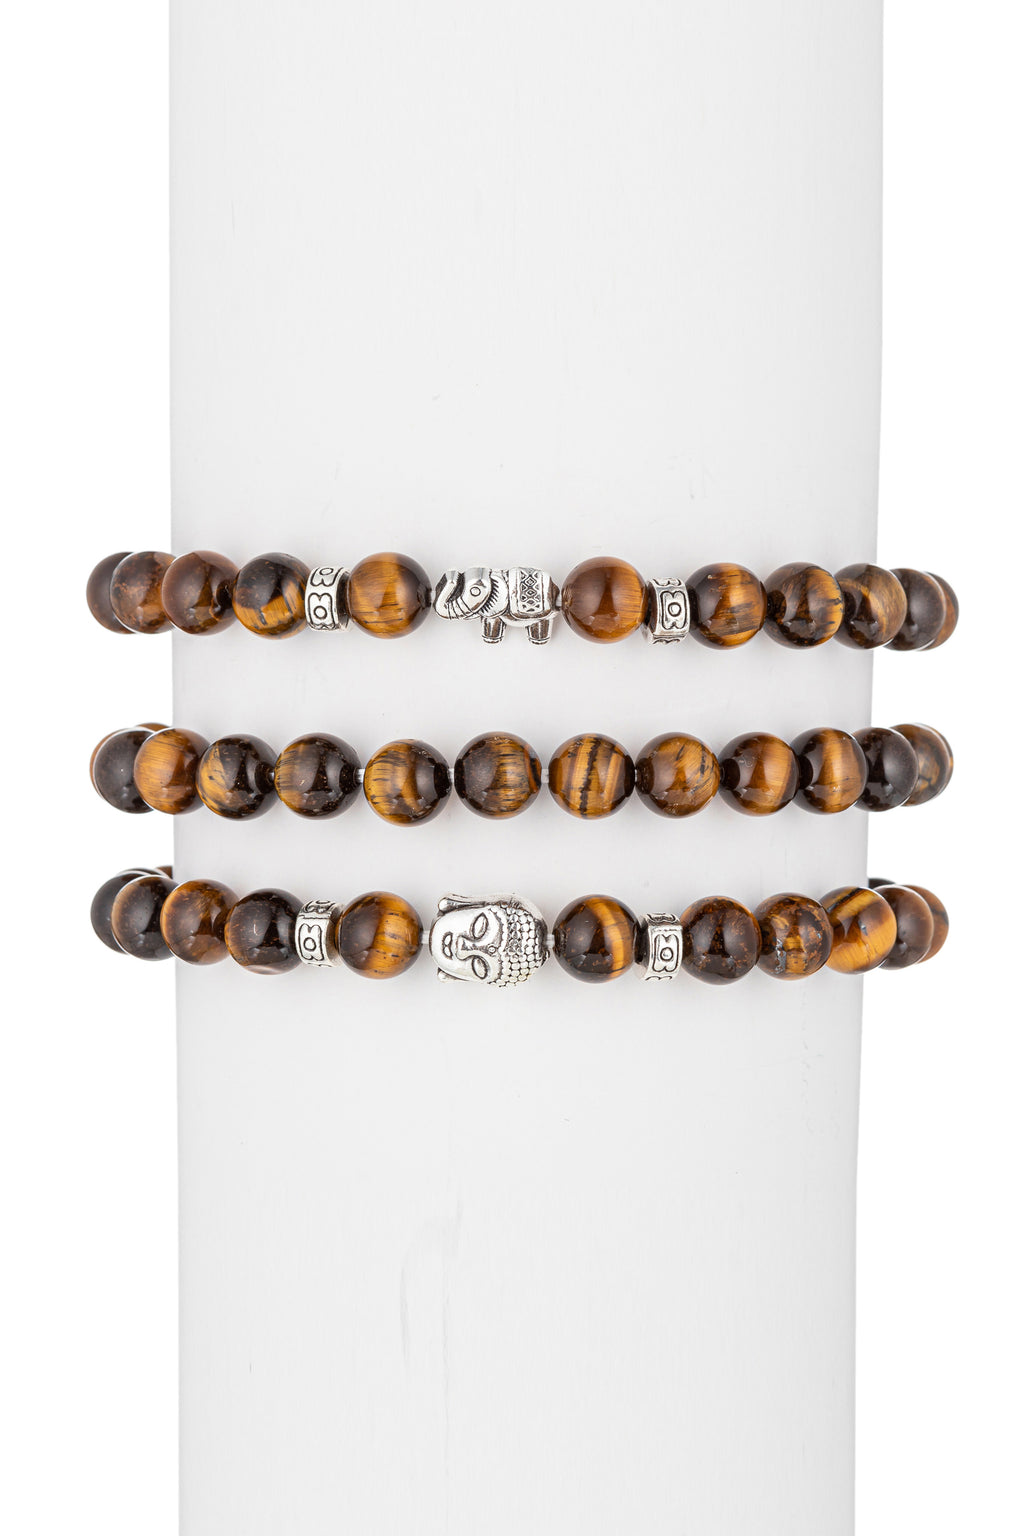 Tiger's eye beaded bracelet with silver charms.